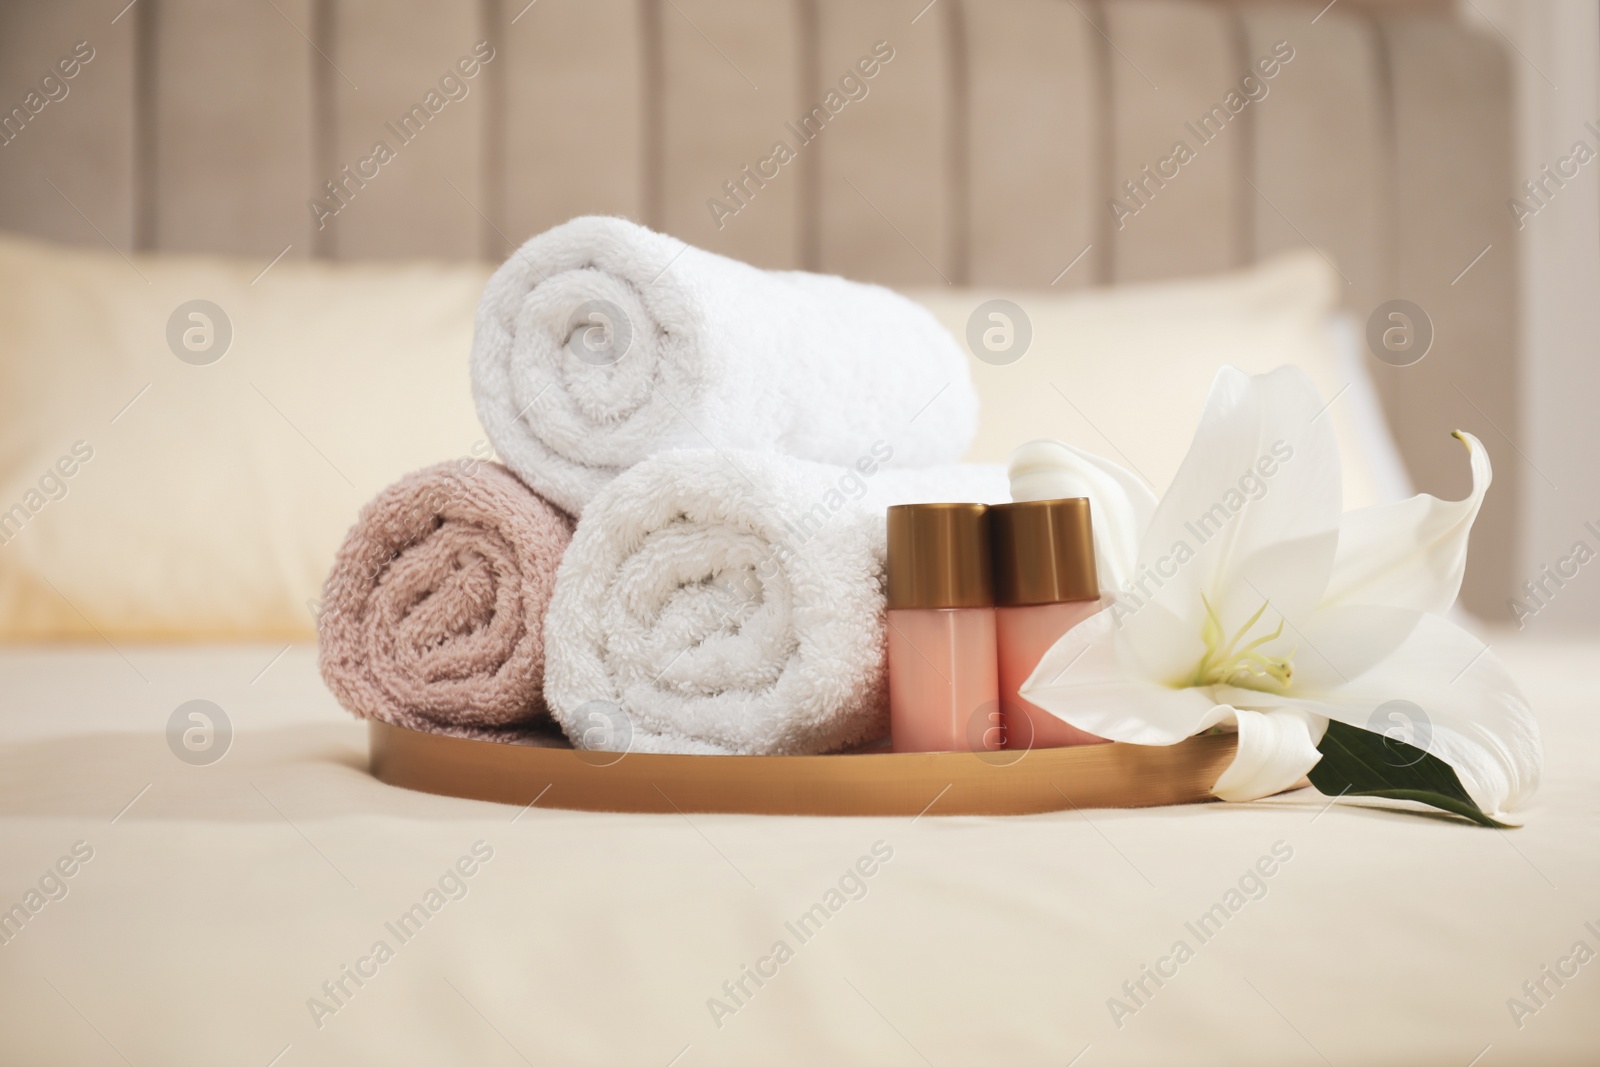 Photo of Rolled clean towels, flower and shampoo bottles on bed